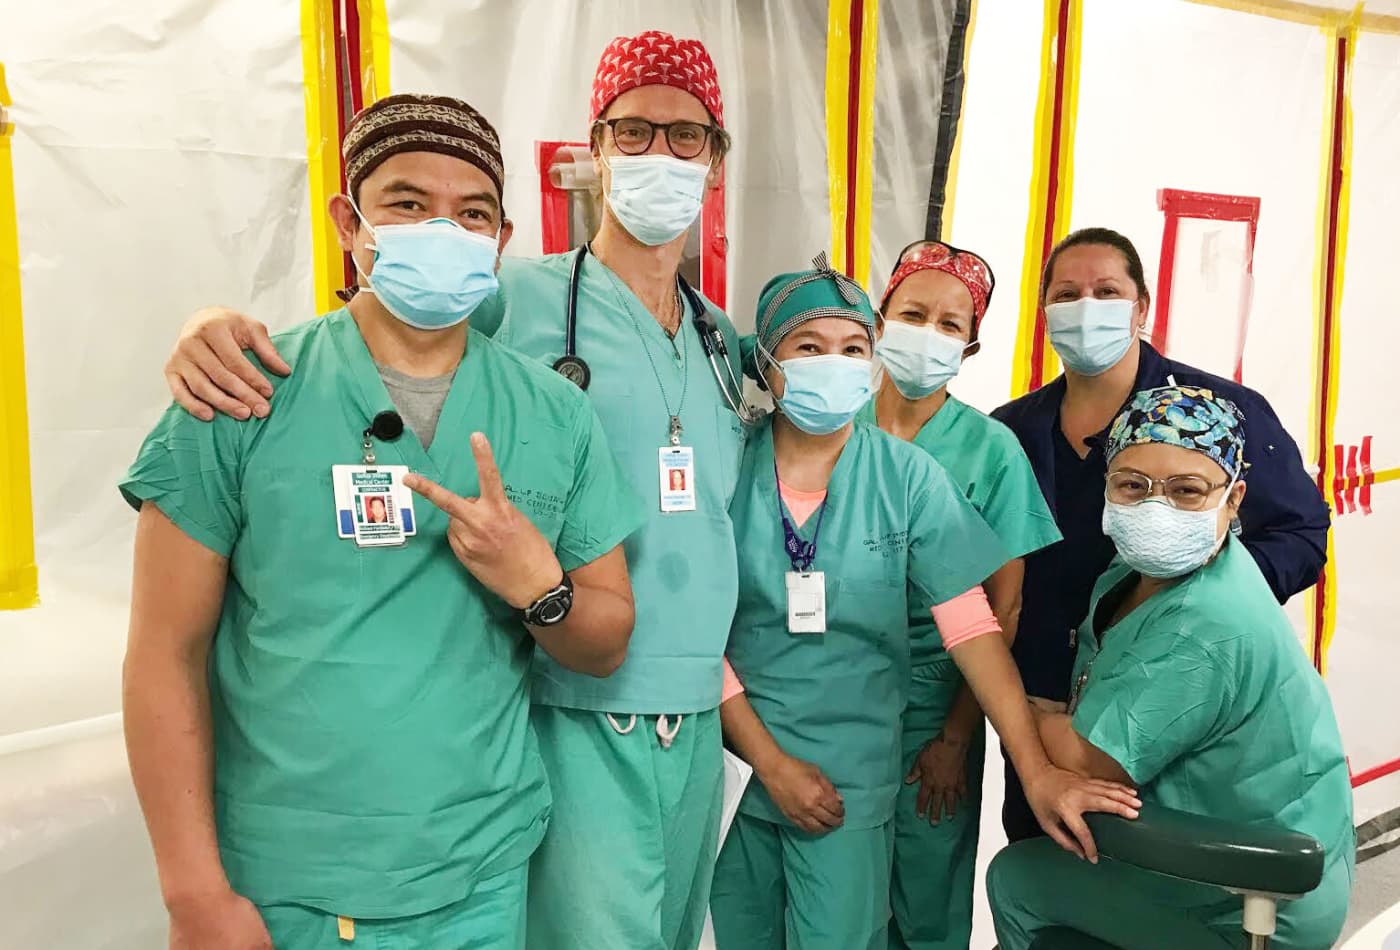 These doctors and nurses volunteered to battle Covid-19 in the Navajo Nation, and came back with a warning